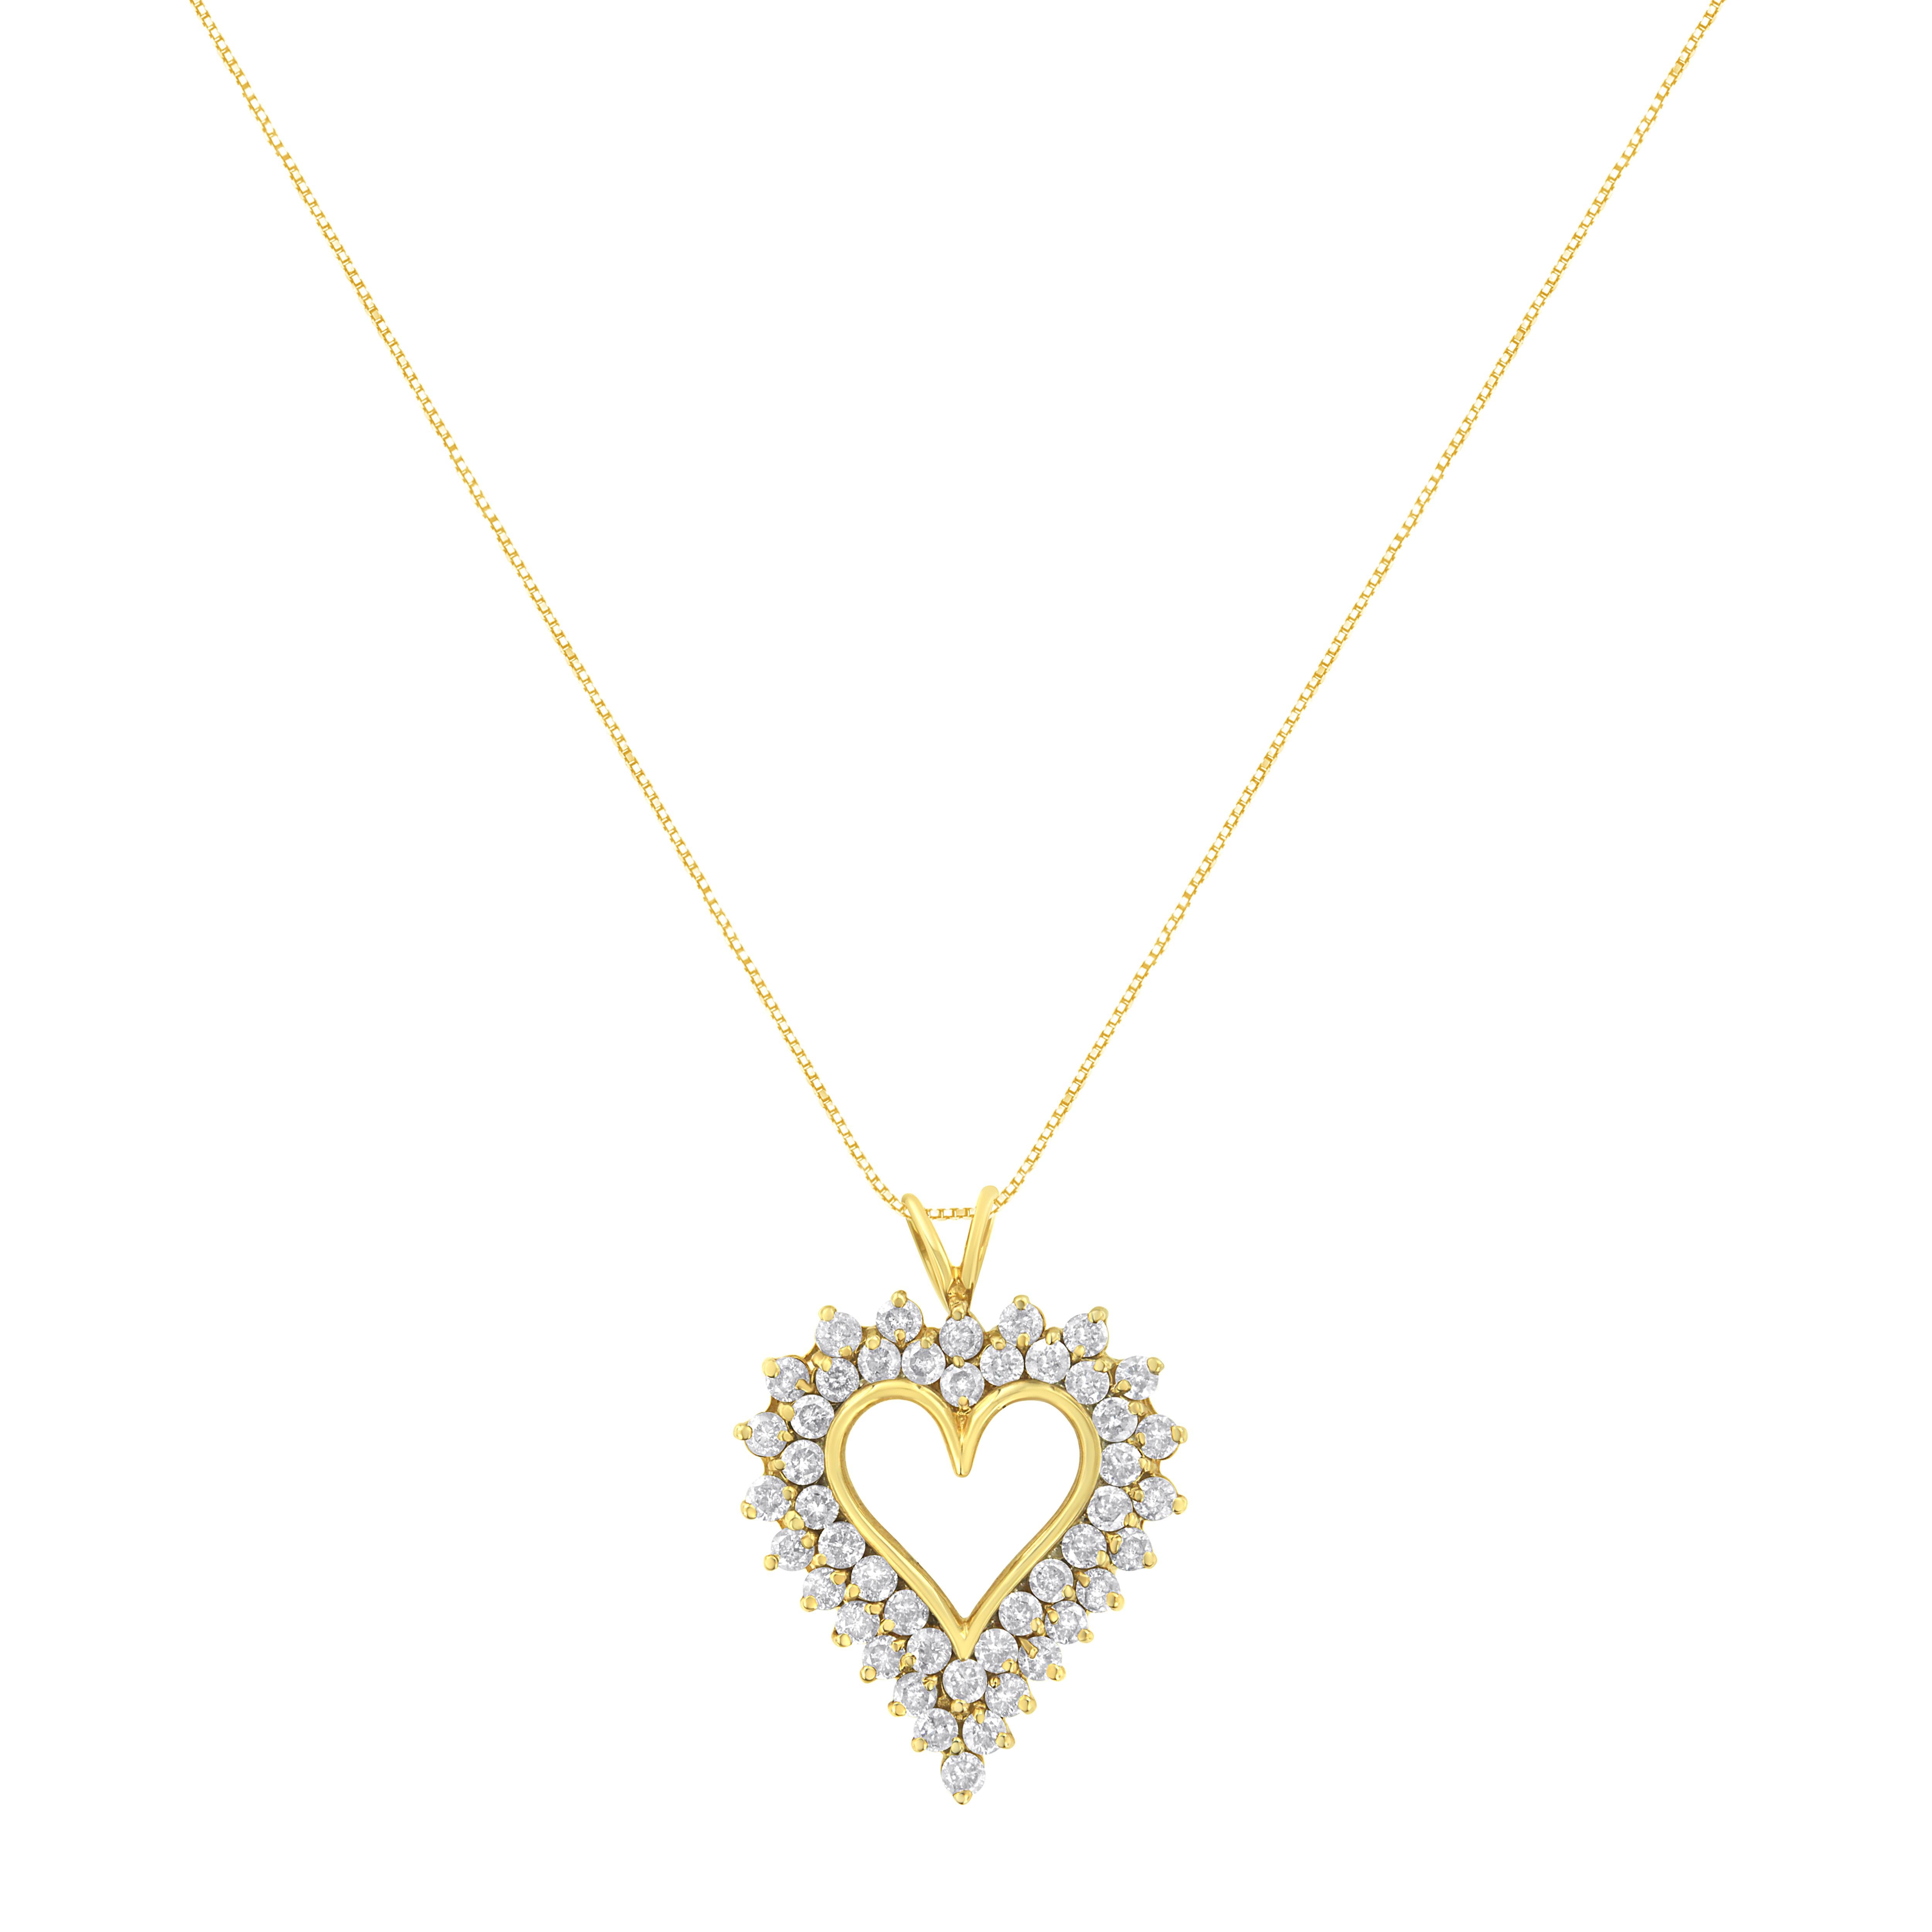 Two rows of natural, sparkling diamonds are set in warm 14K yellow gold plated .925 sterling silver to create a stunning open heart design in this beautiful pendant necklace for her. This pendant has 46 round diamonds, that are I1-I2 in clarity and